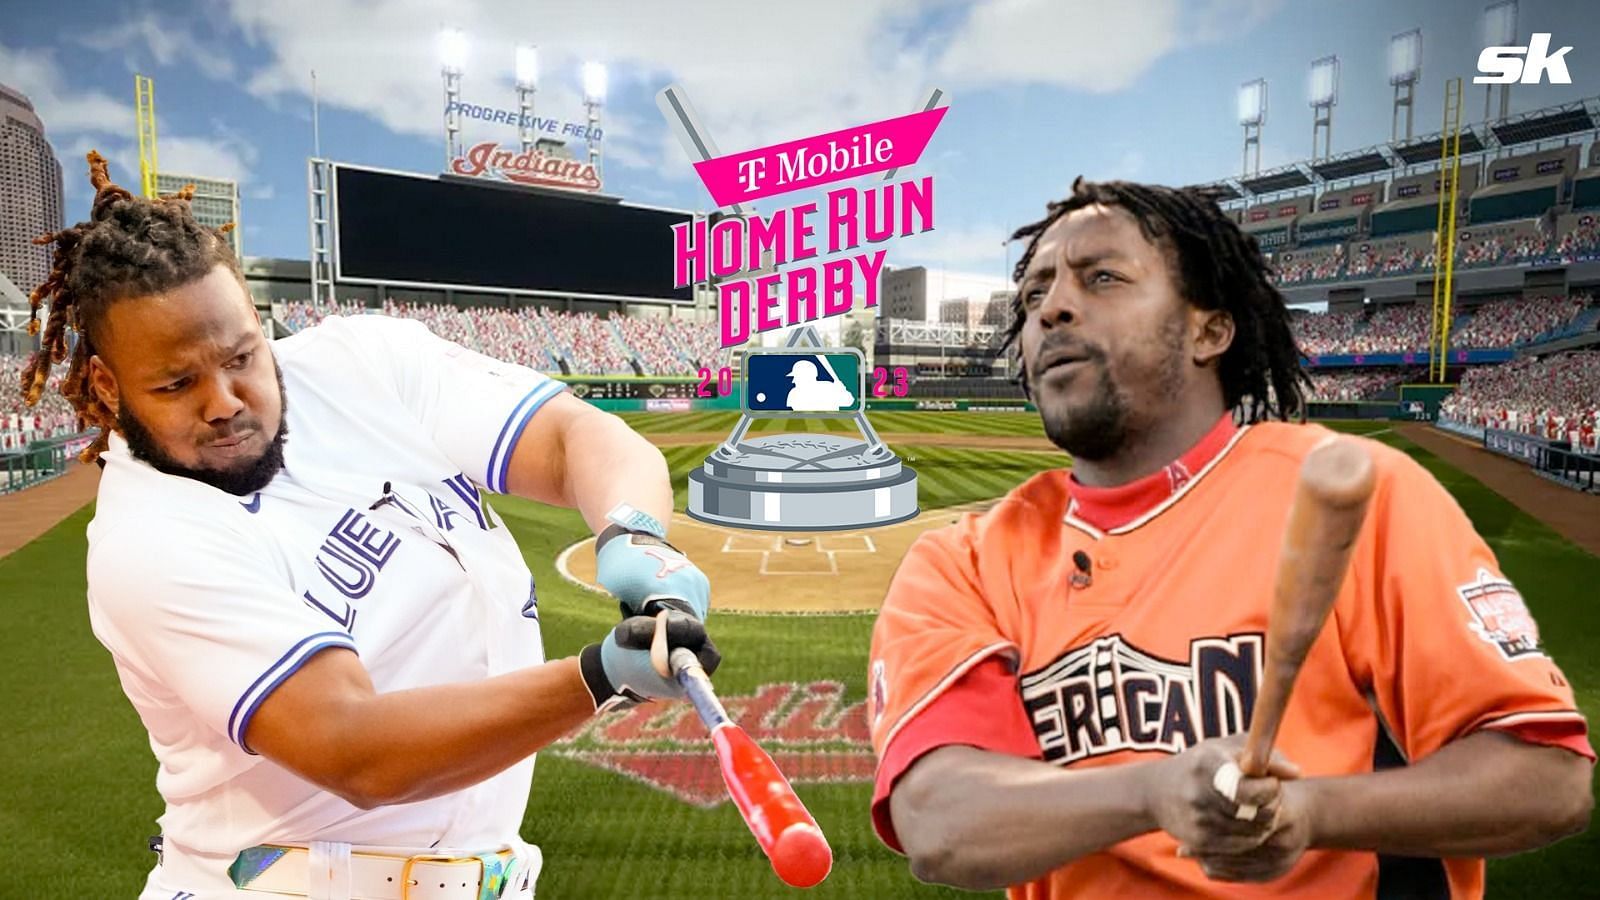 Like father, like son - Vladimir Guerrero Jr. joins Guerrero Sr. in becoming the first father-son duo to win the Home Run Derby 